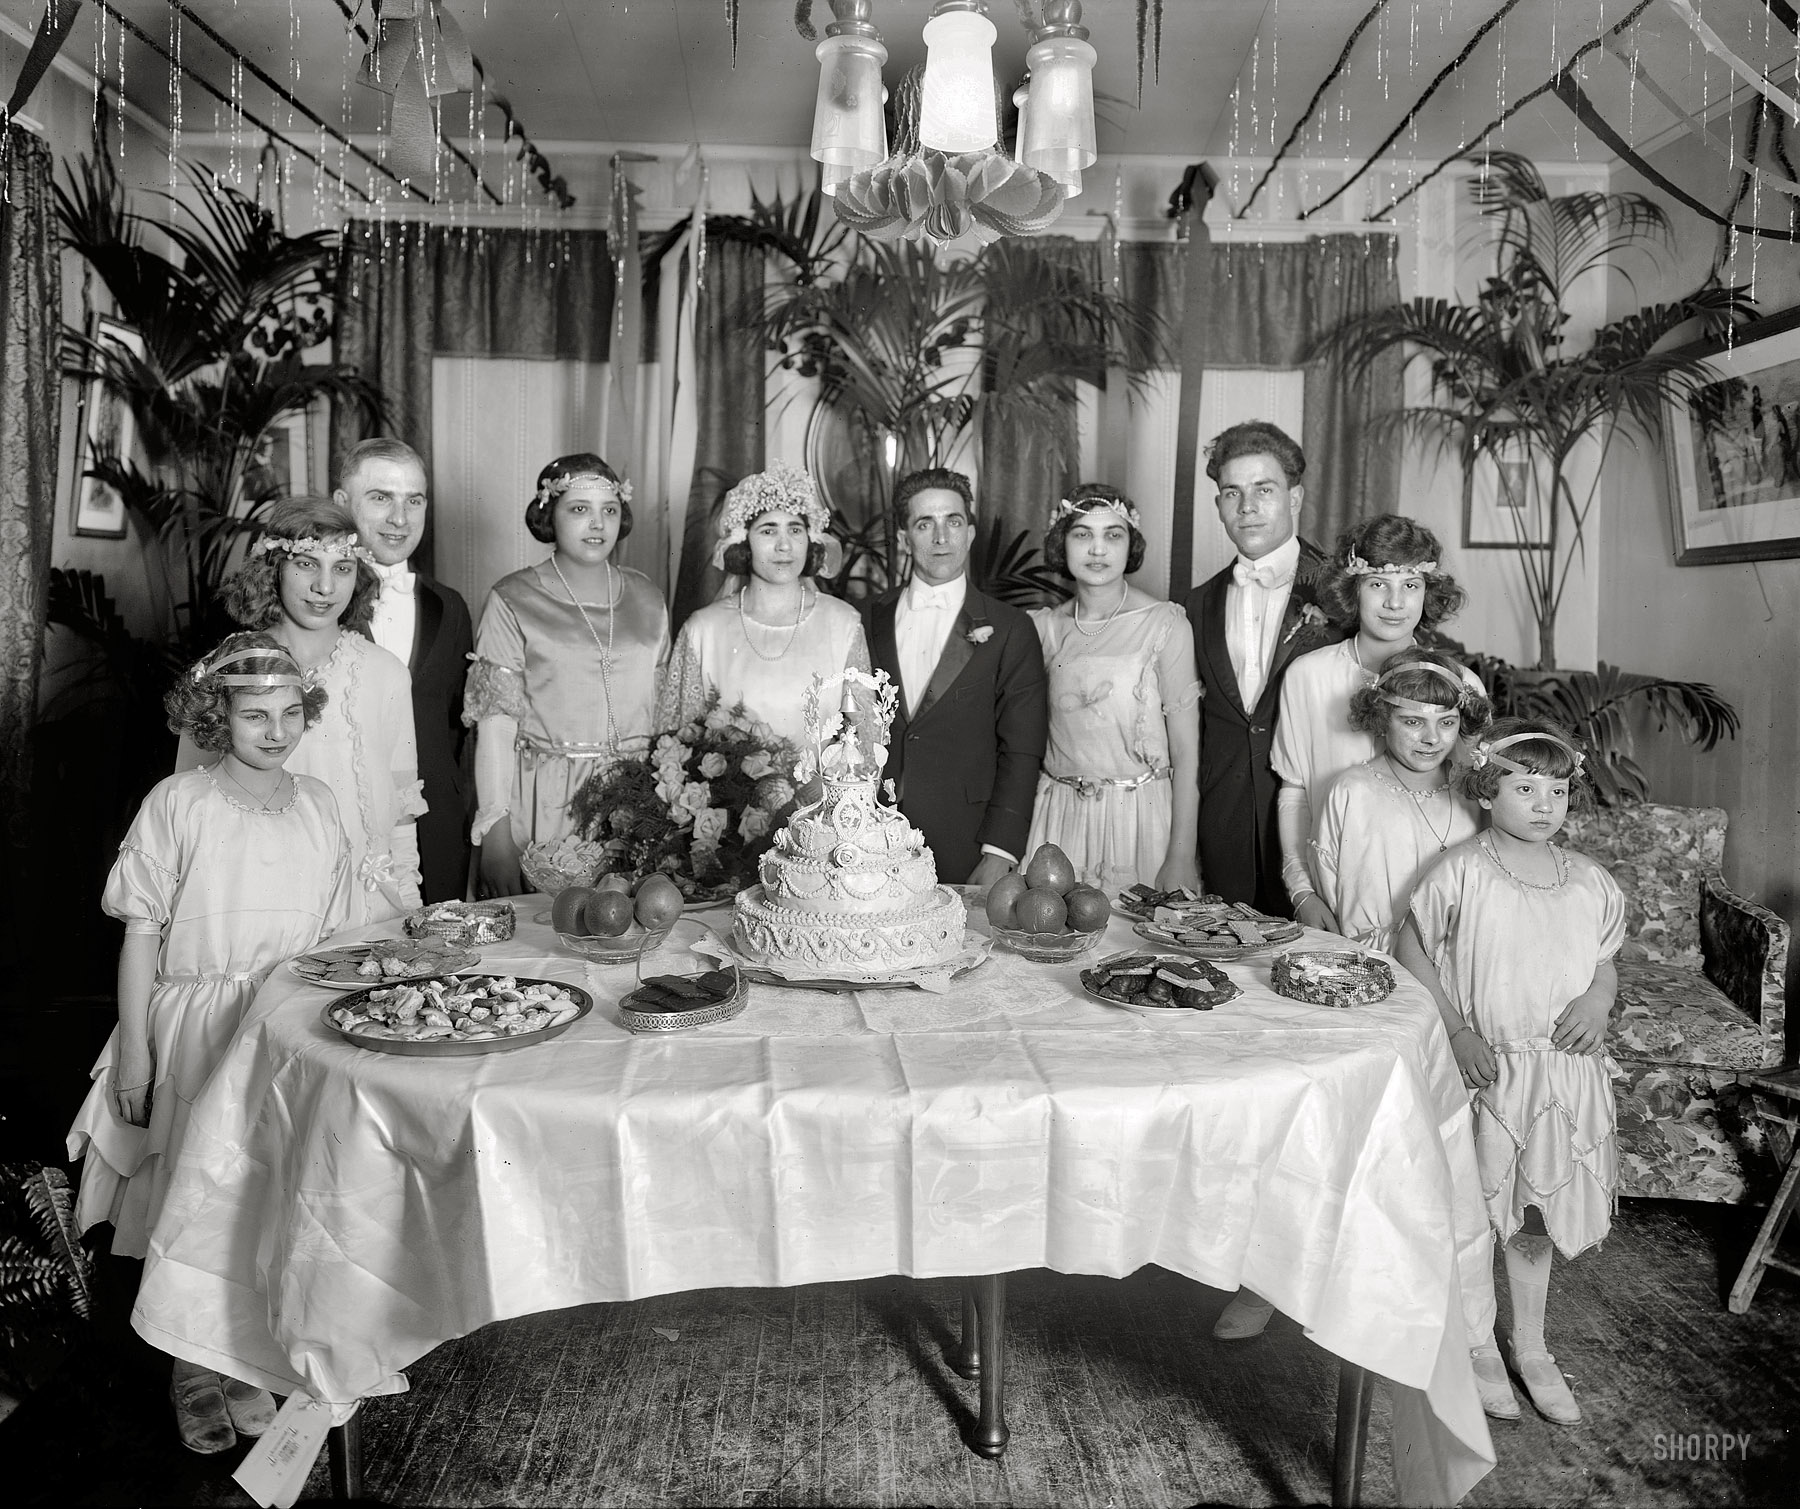 Washington, D.C., circa 1921. "Scalco, National Fruit Co." Salvatore Scalco, the groom, was company president. National Photo glass negative. View full size.